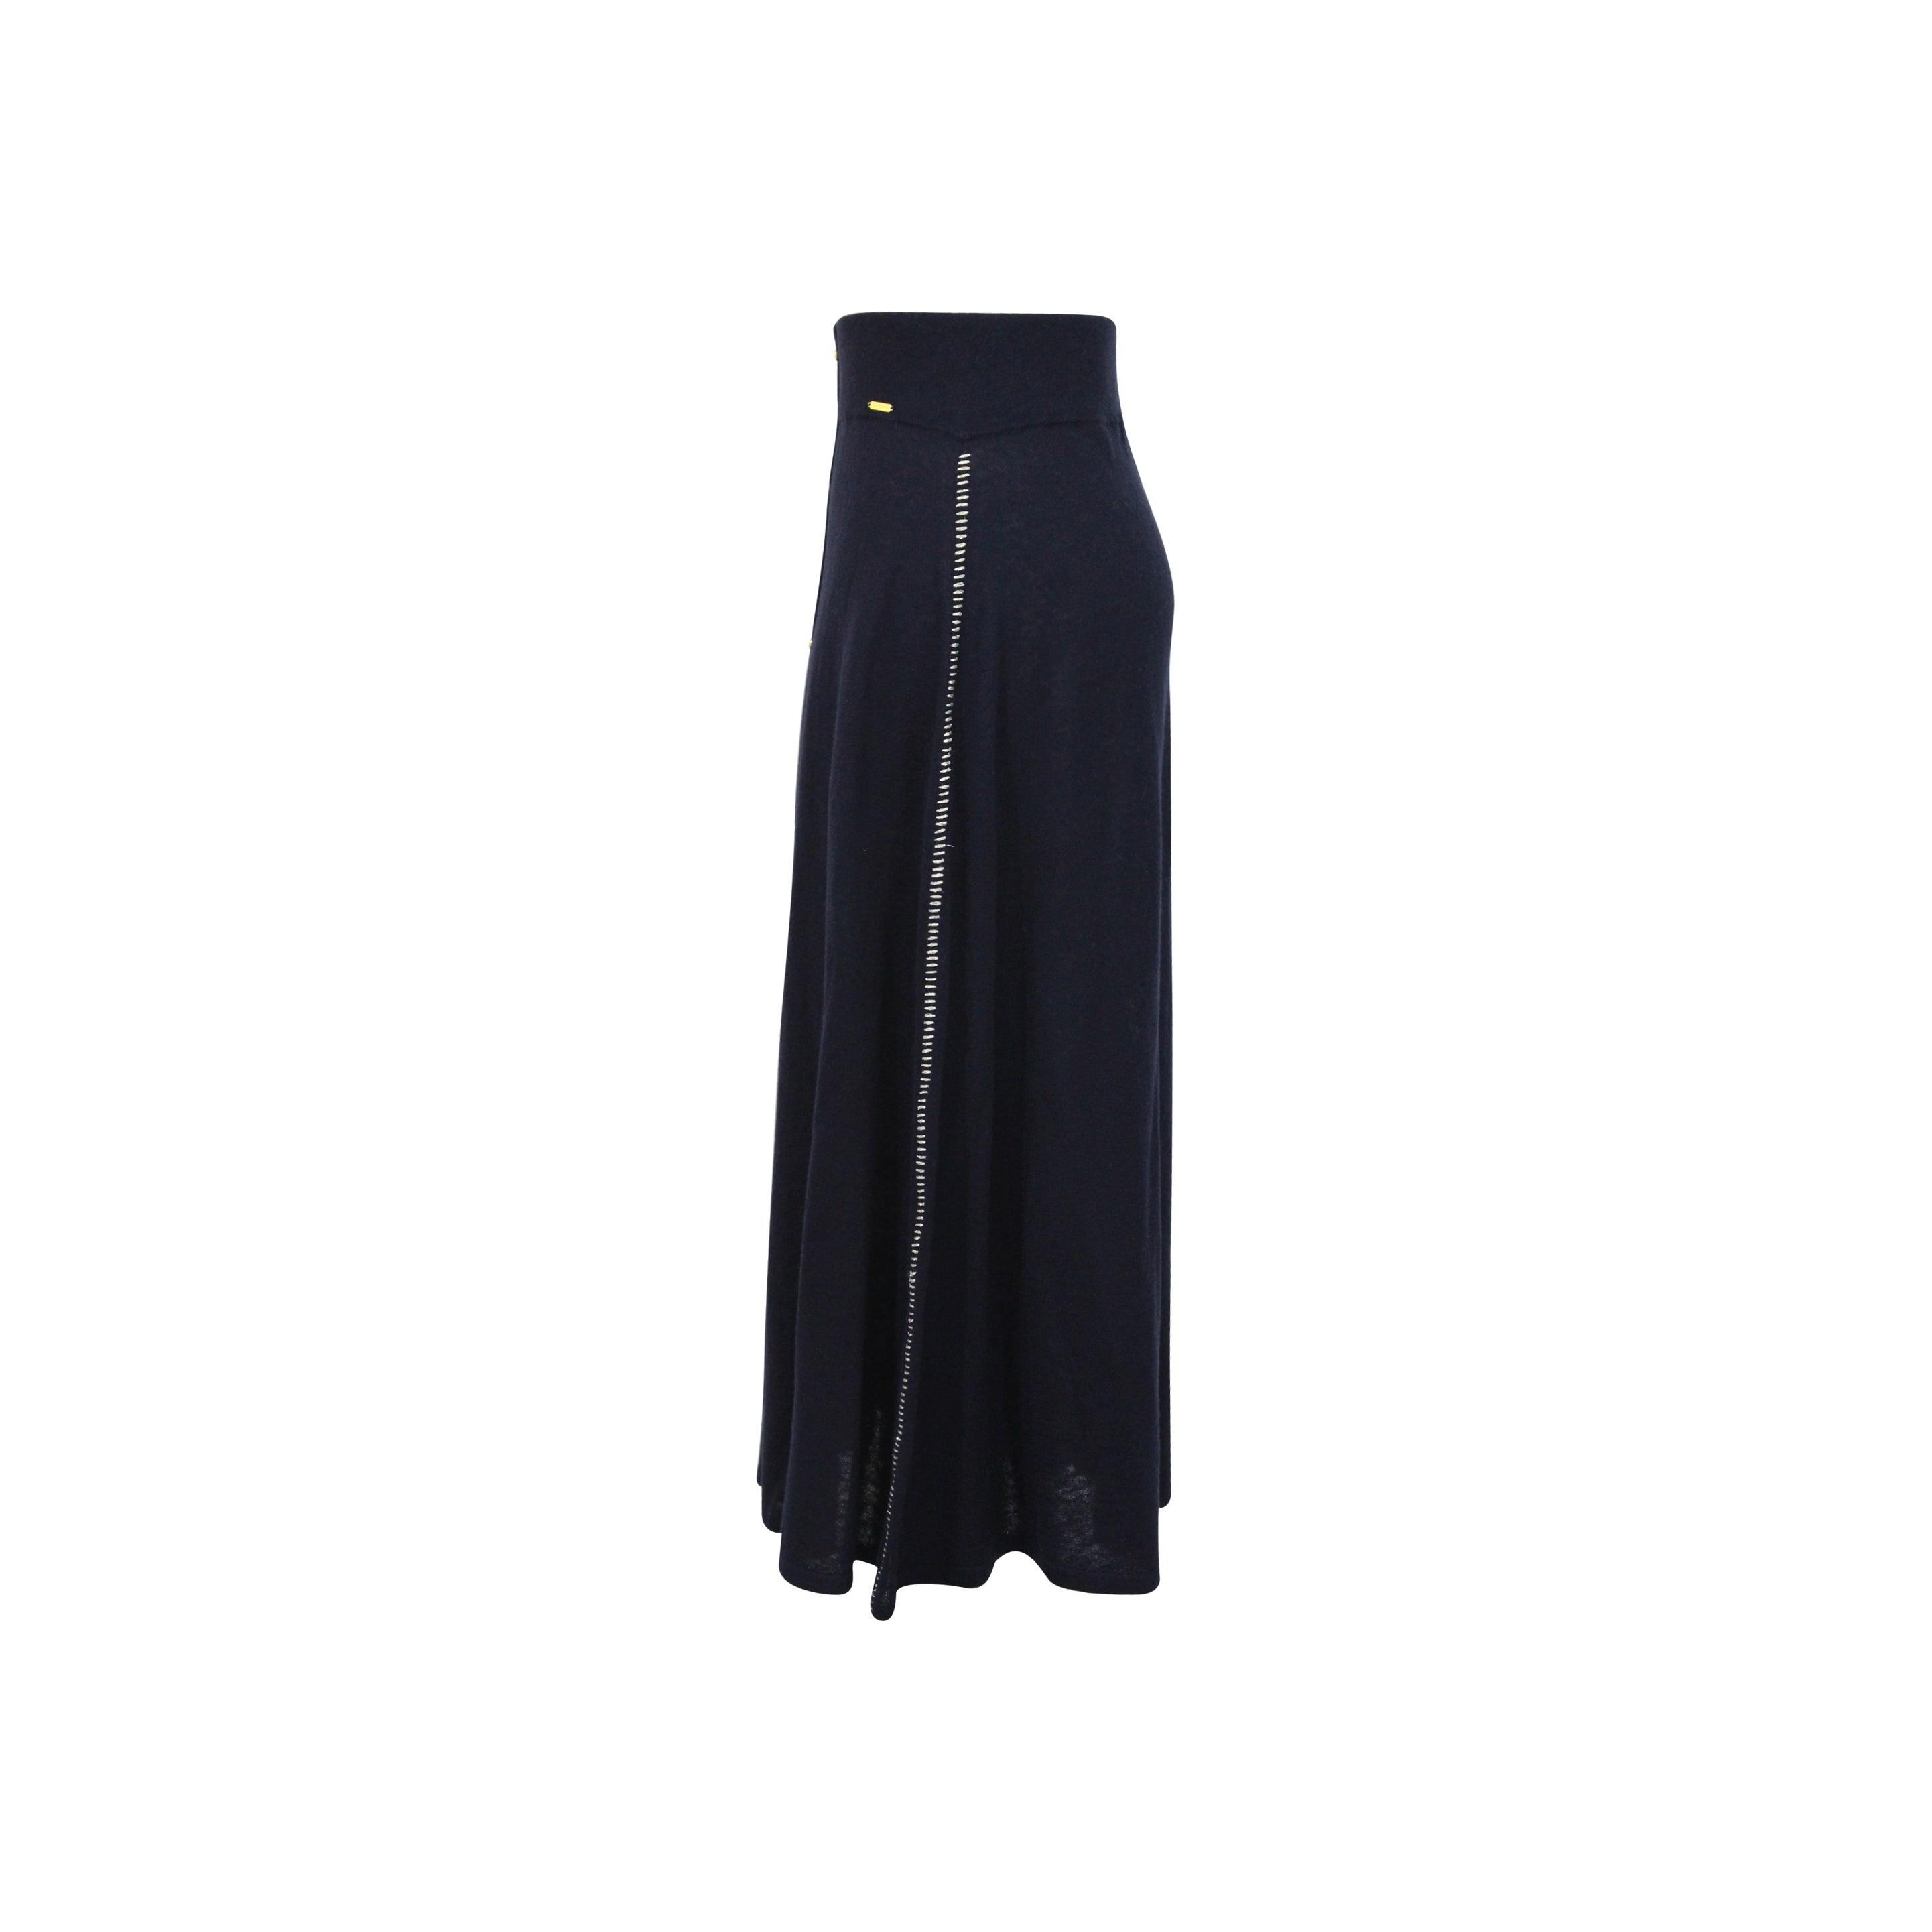 Discover the Trendy Violet Knit Skirt by Gosia Orlowska